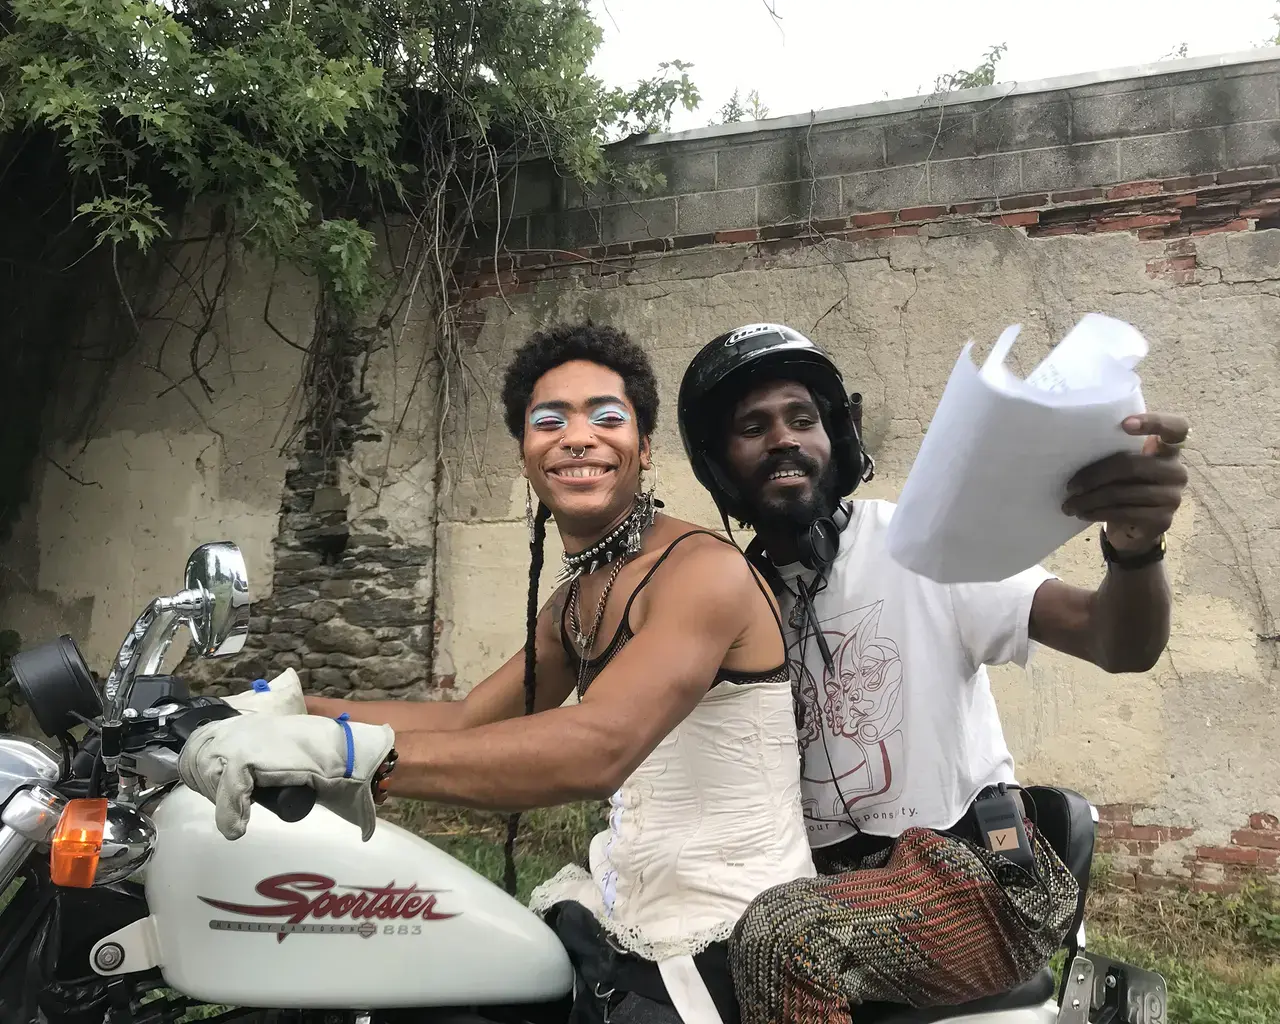 Pew Fellow Vernon Jordan lll rides on the back of a motercycle while holding pages of a script on set of "One Magenta Afternoon."